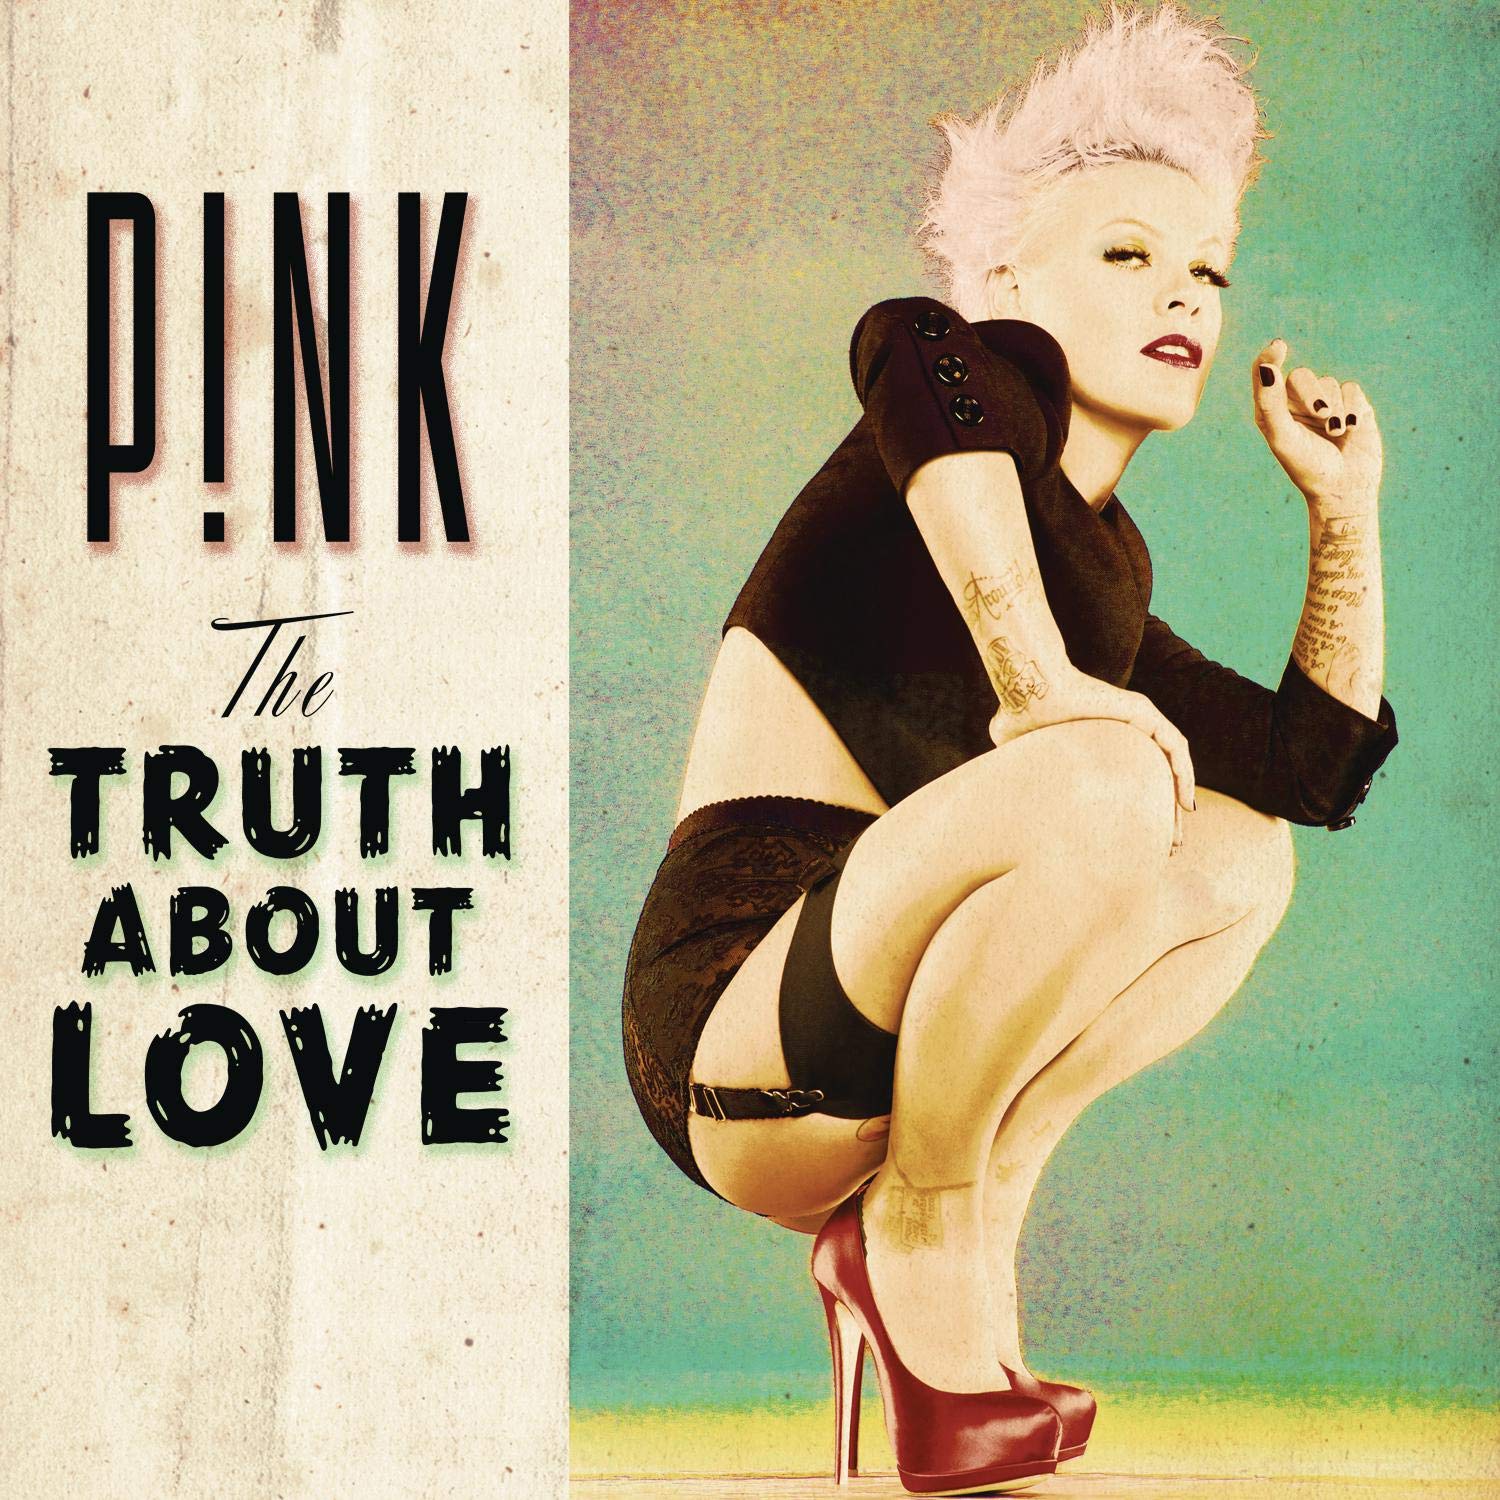 pink raise your glass album cover